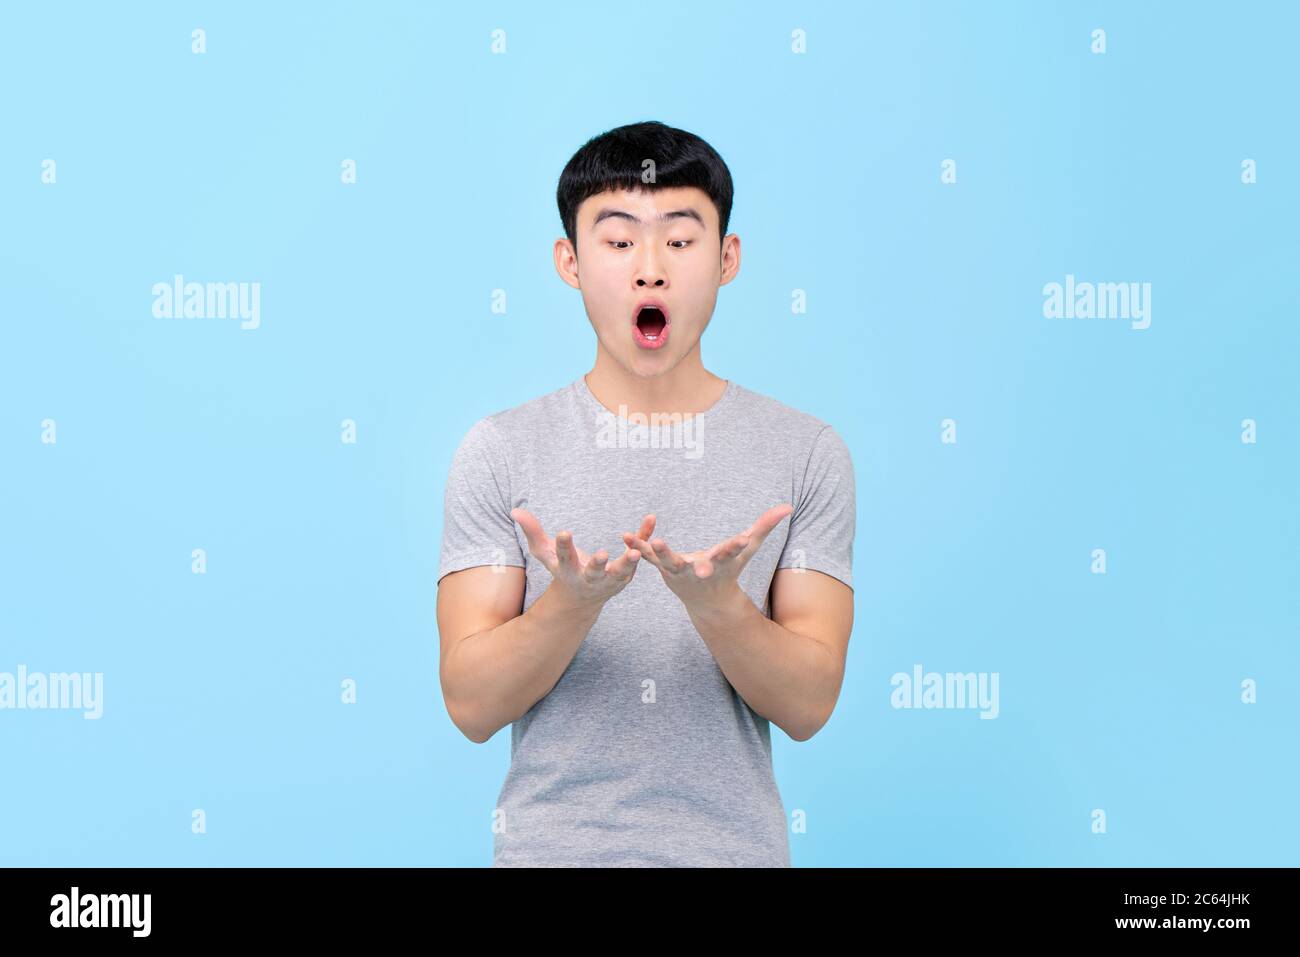 Fun portrait of astonished young Asian man looking at both hands with mouth open in isolated studio blue background Stock Photo